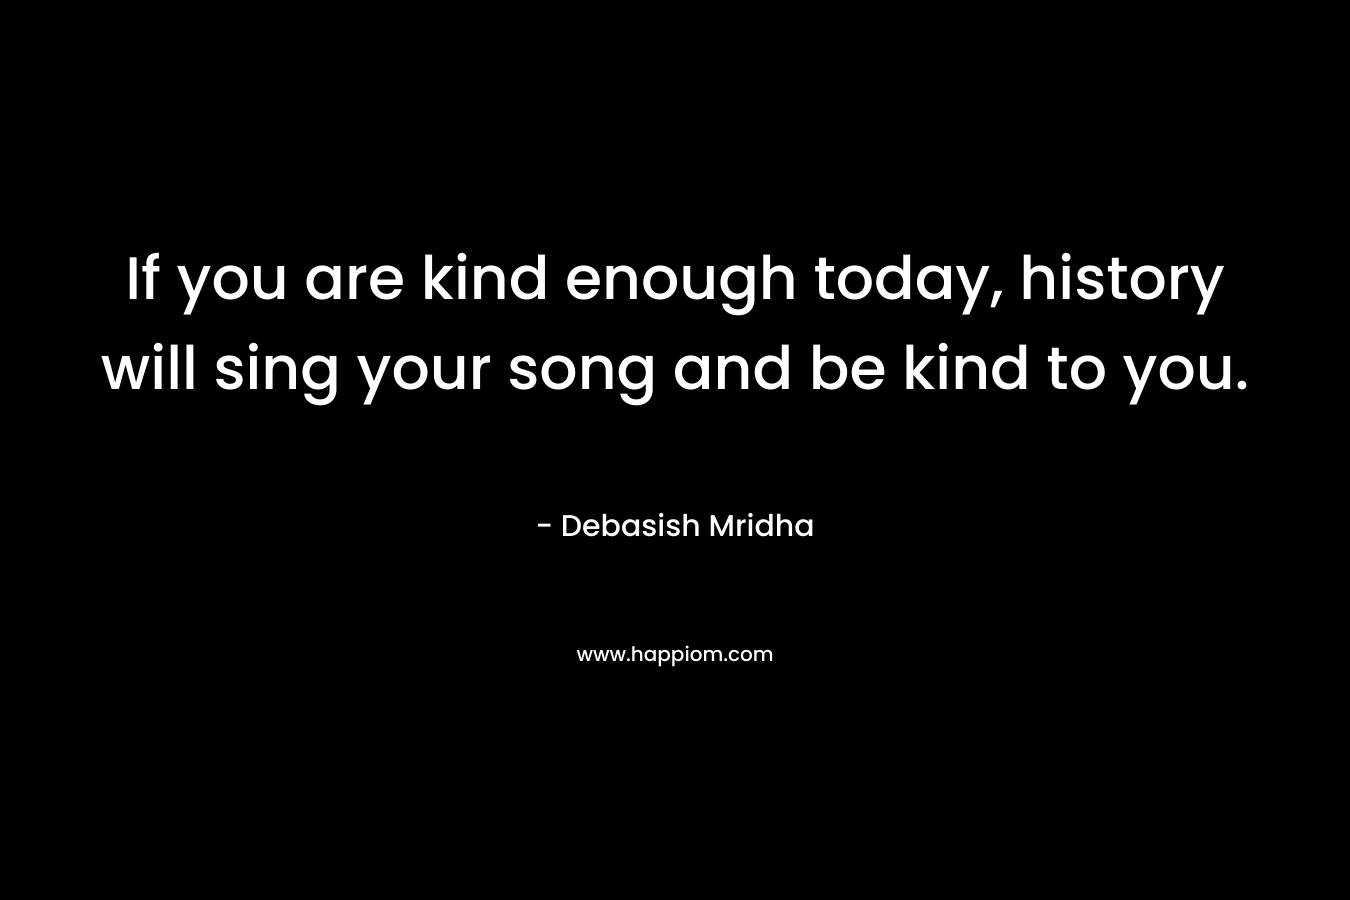 If you are kind enough today, history will sing your song and be kind to you. – Debasish Mridha